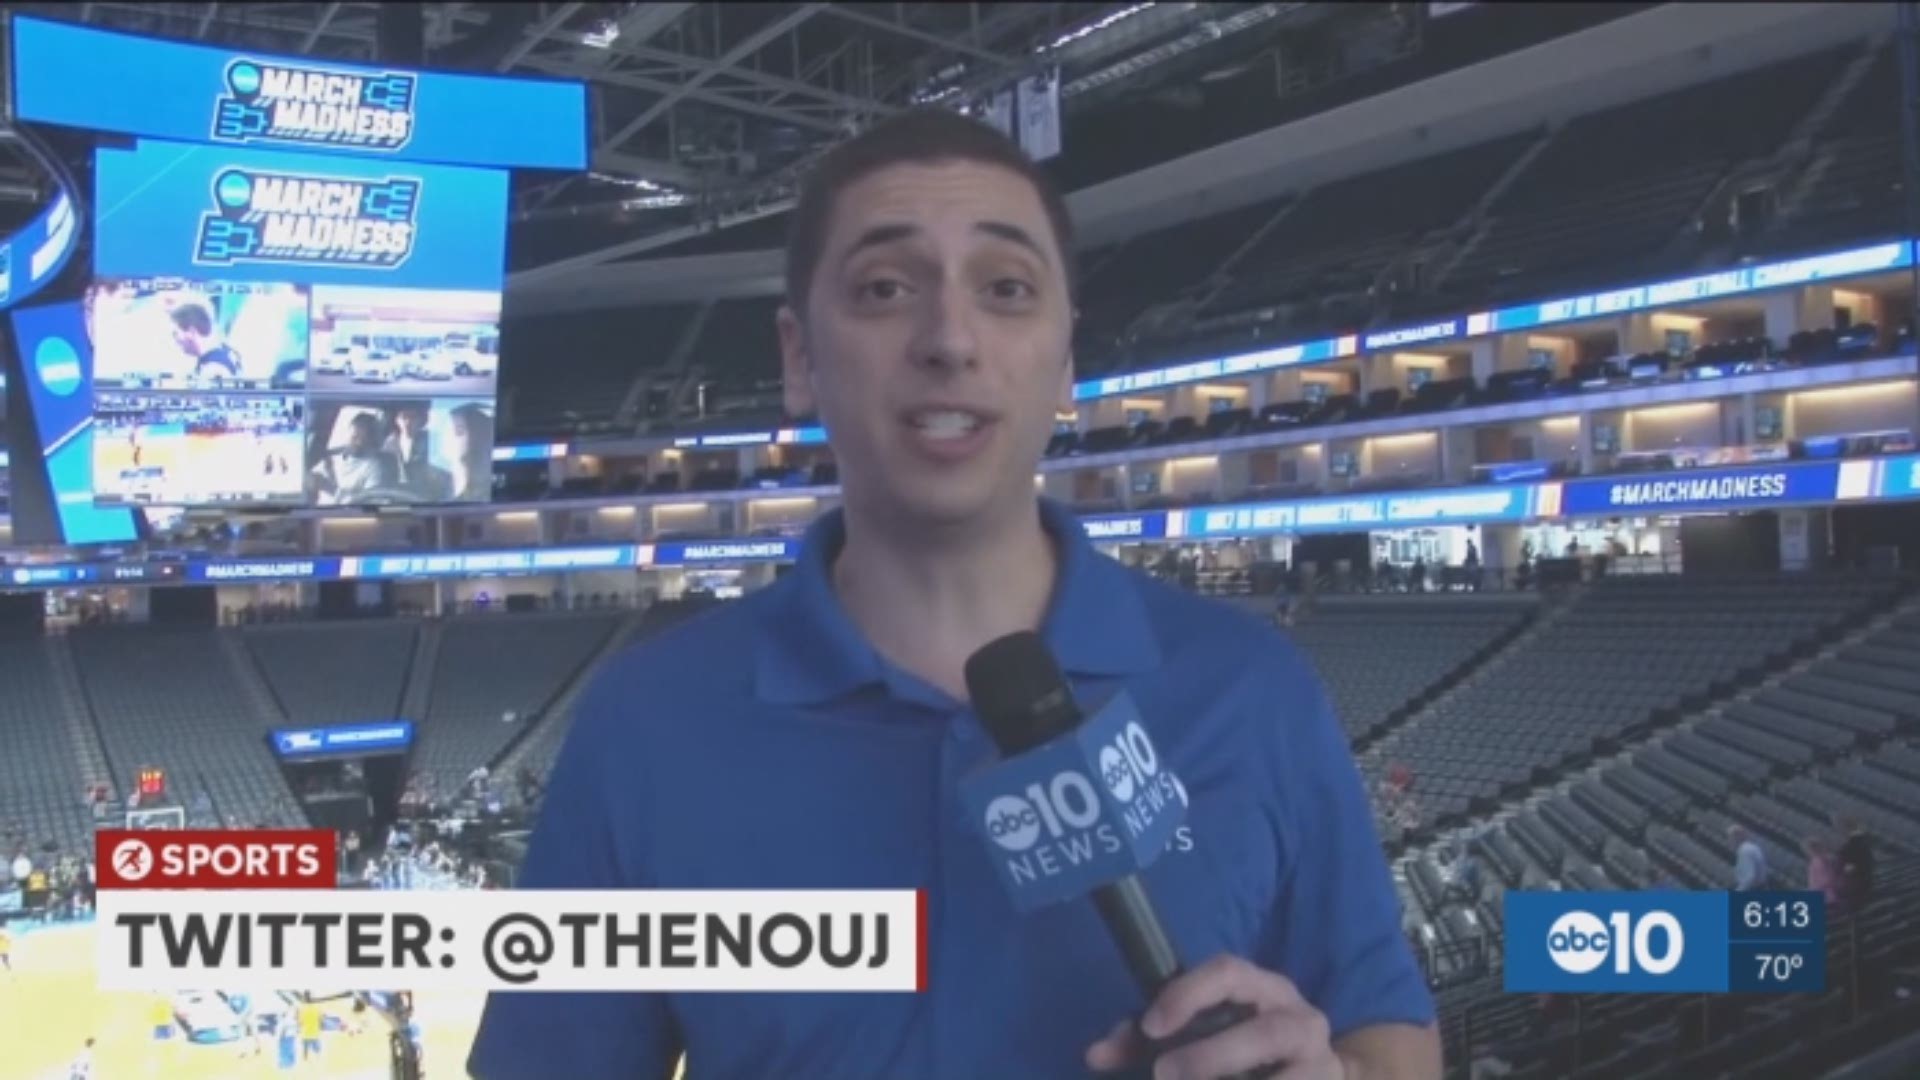 ABC10's Pierre Noujaim goes inside Thursday's open practice day with all the teams participating in the NCAA Tournament this weekend at Golden 1 Center and checks in with the UC Davis Aggies in Tulsa.